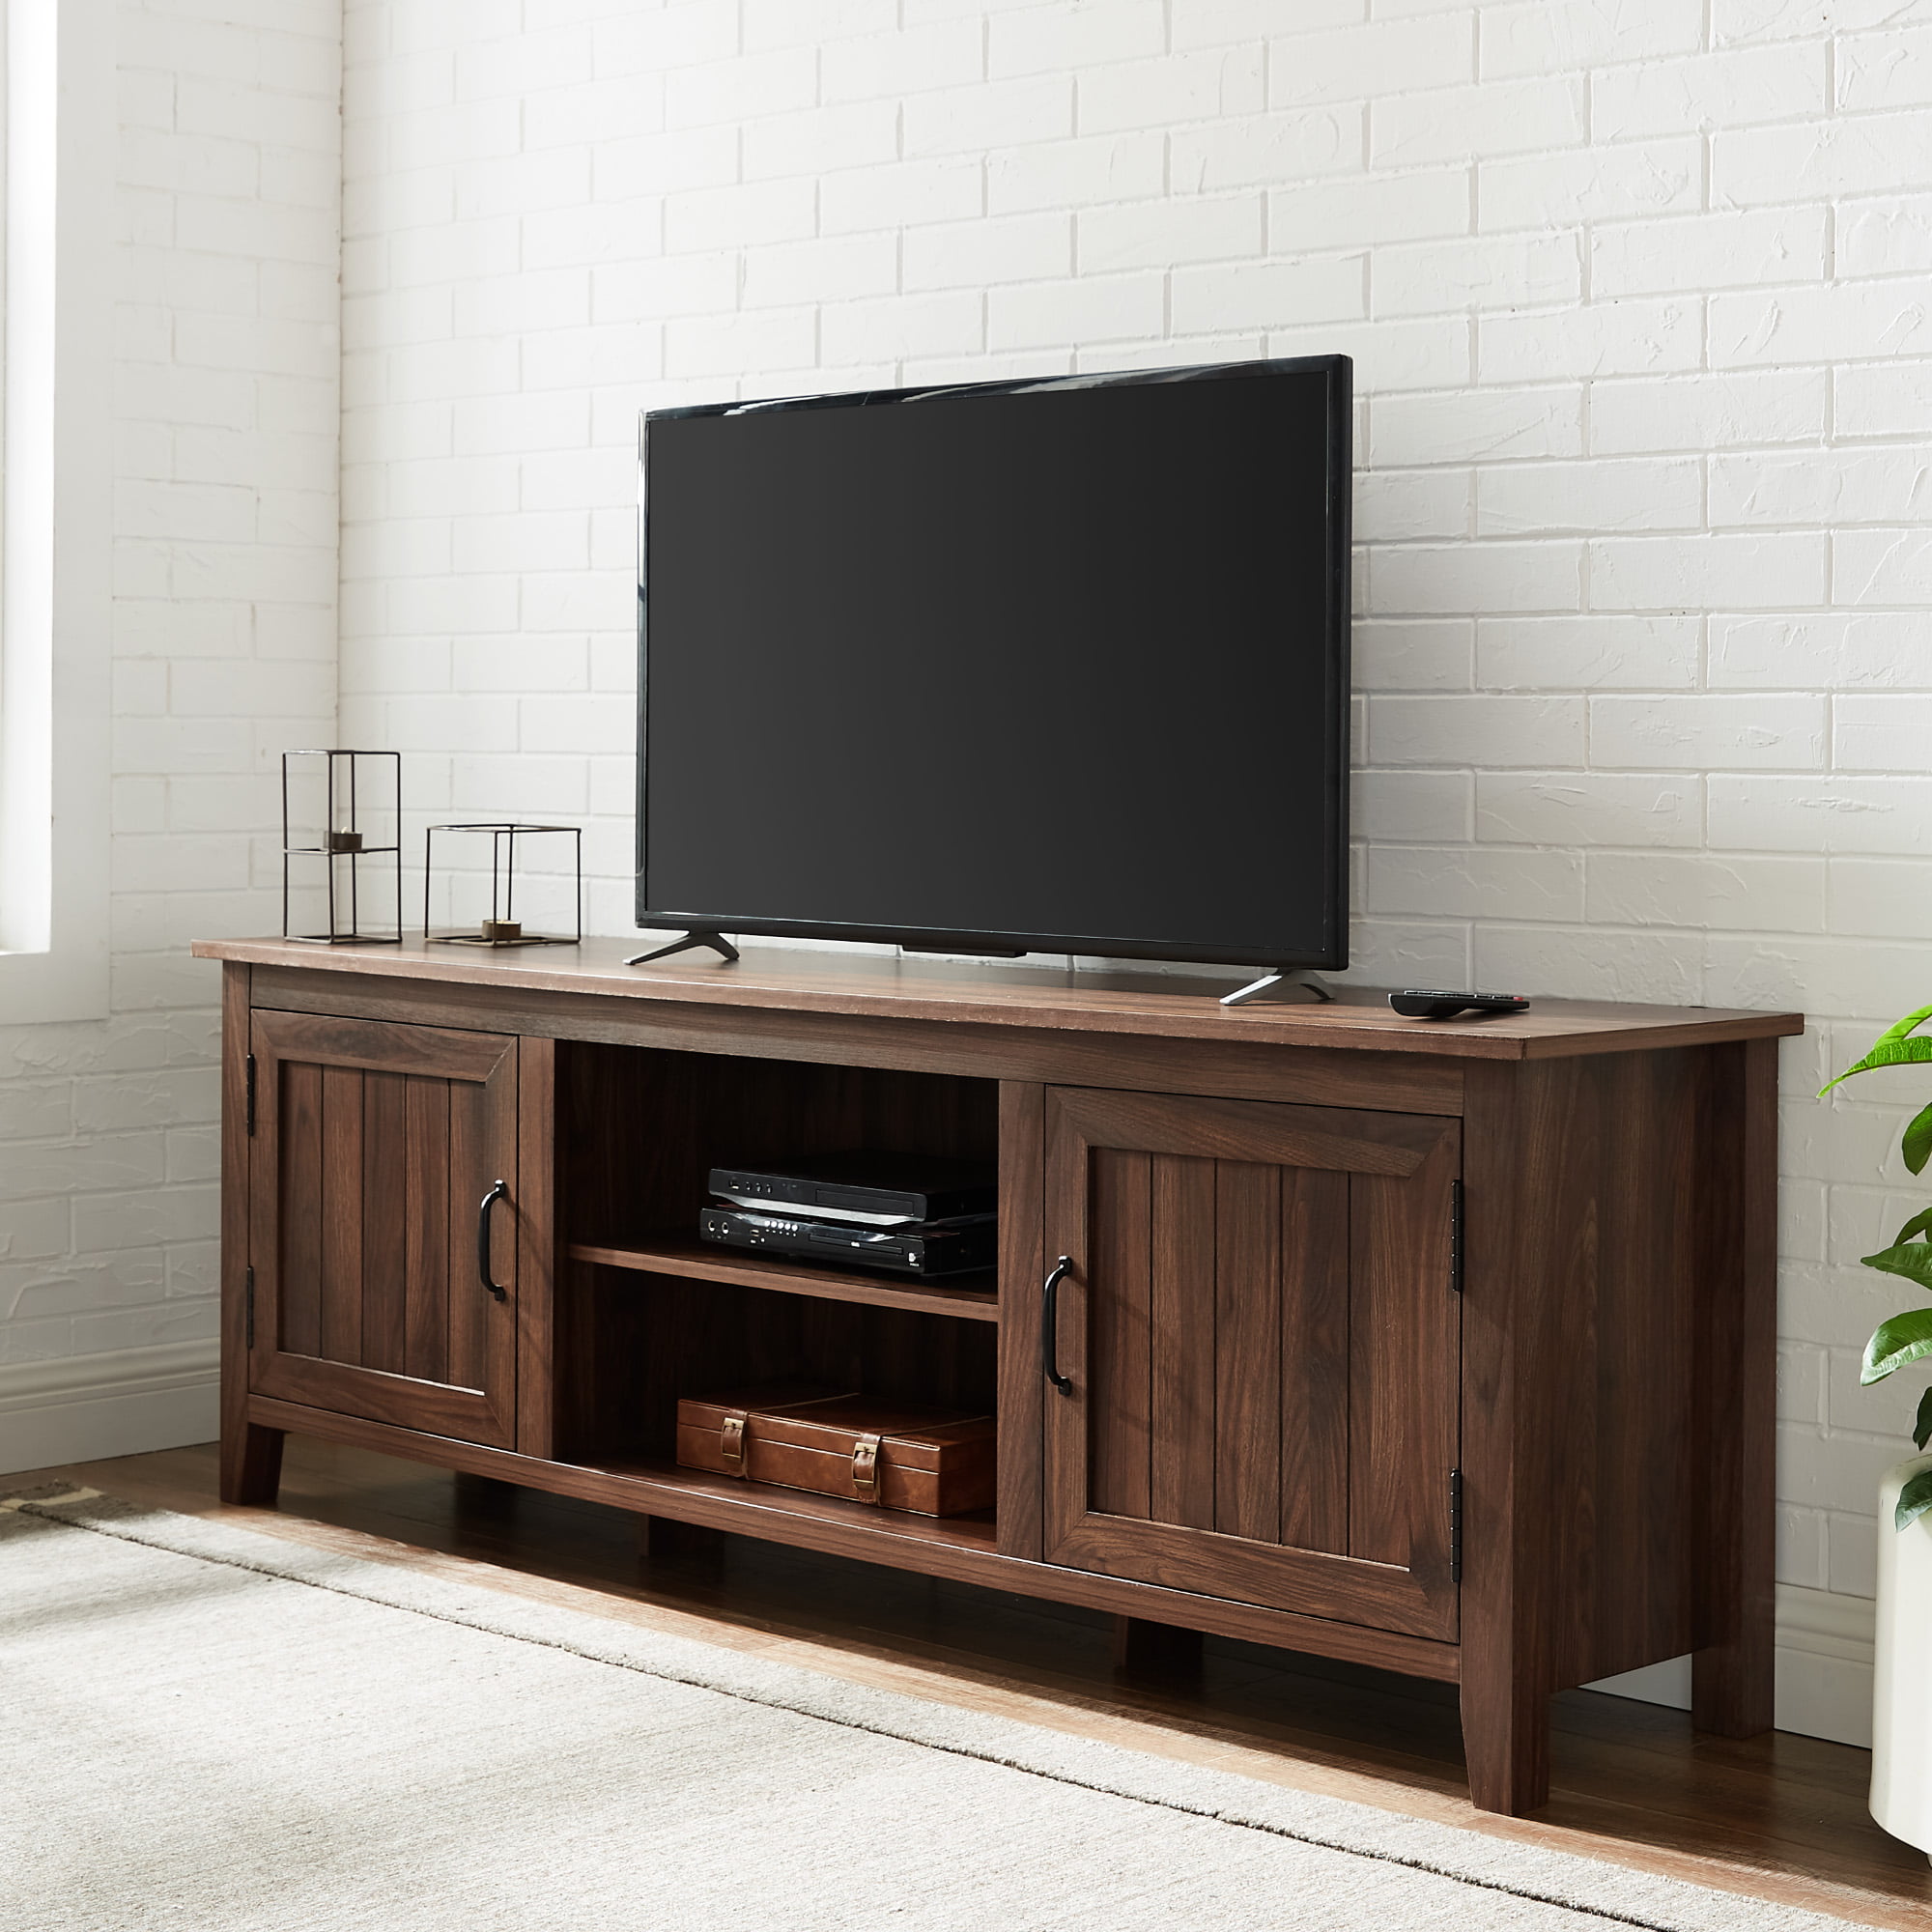 up to 50 inch TV Espresso Dark Brown Wood Finish Entertainment Cubby TV Stand 